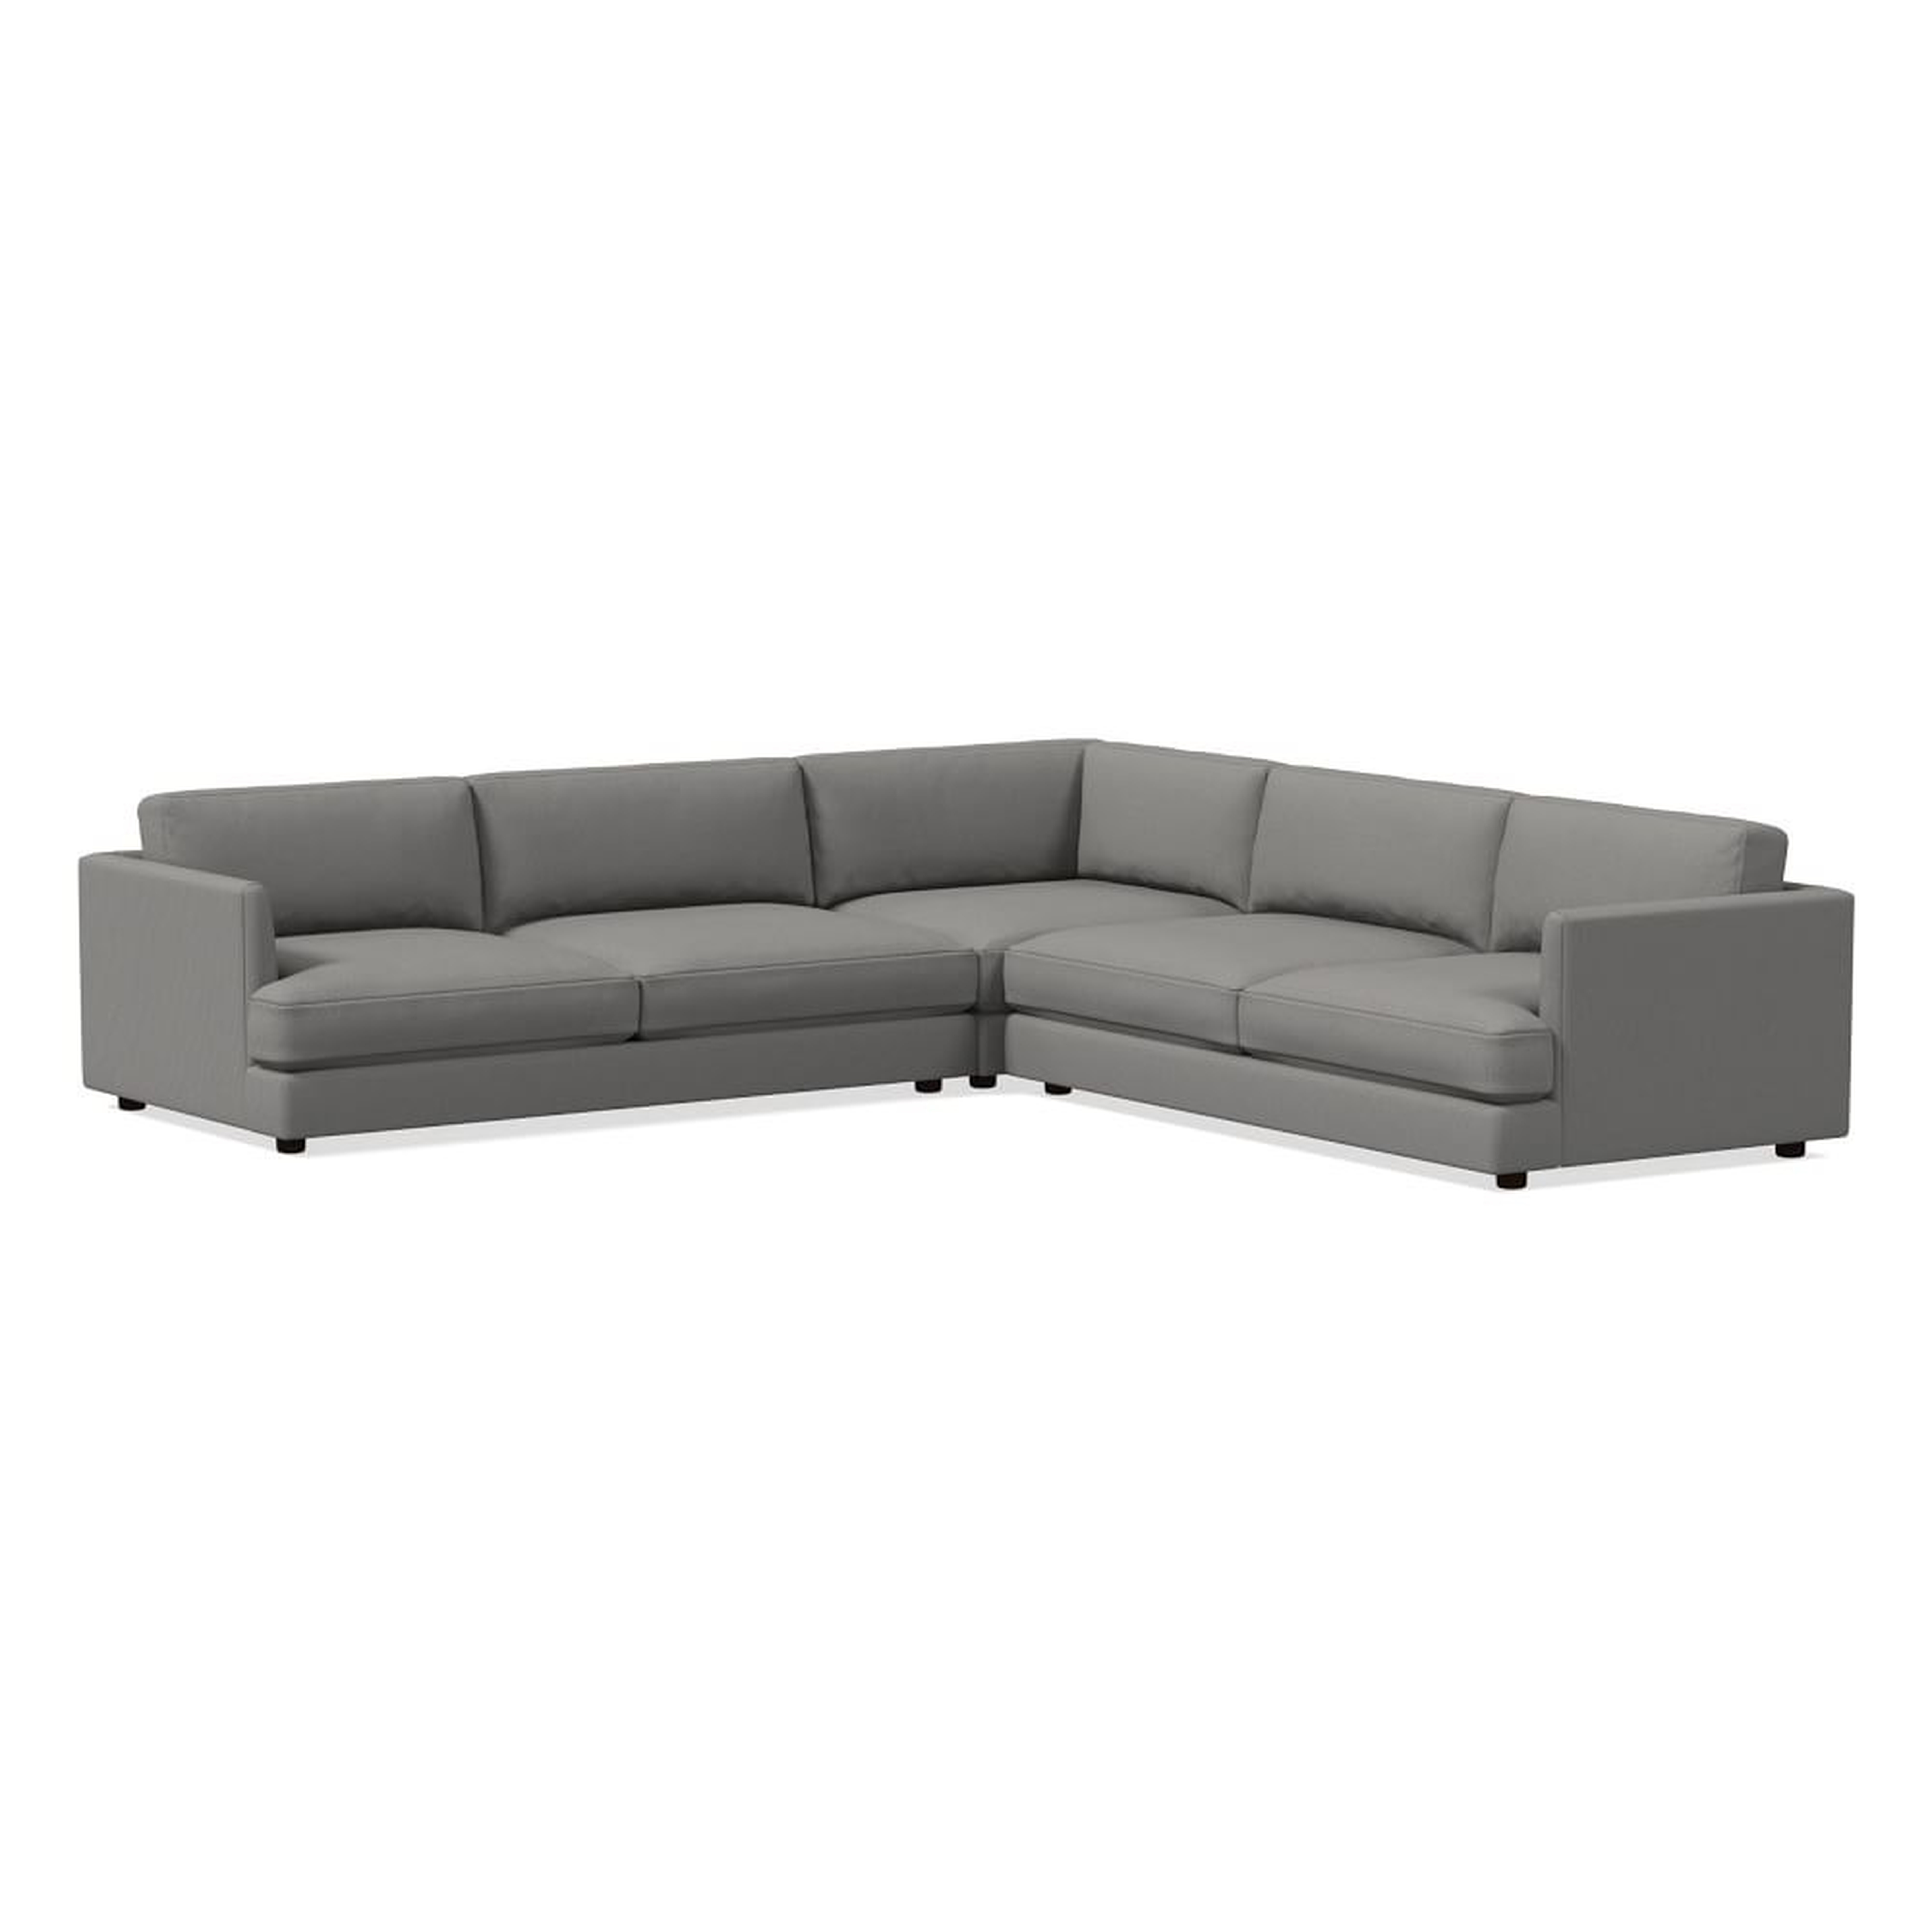 Haven 113" Multi Seat 3-Piece L-Shaped Sectional, Extra Deep Depth, Performance Washed Canvas, Storm Gray - West Elm